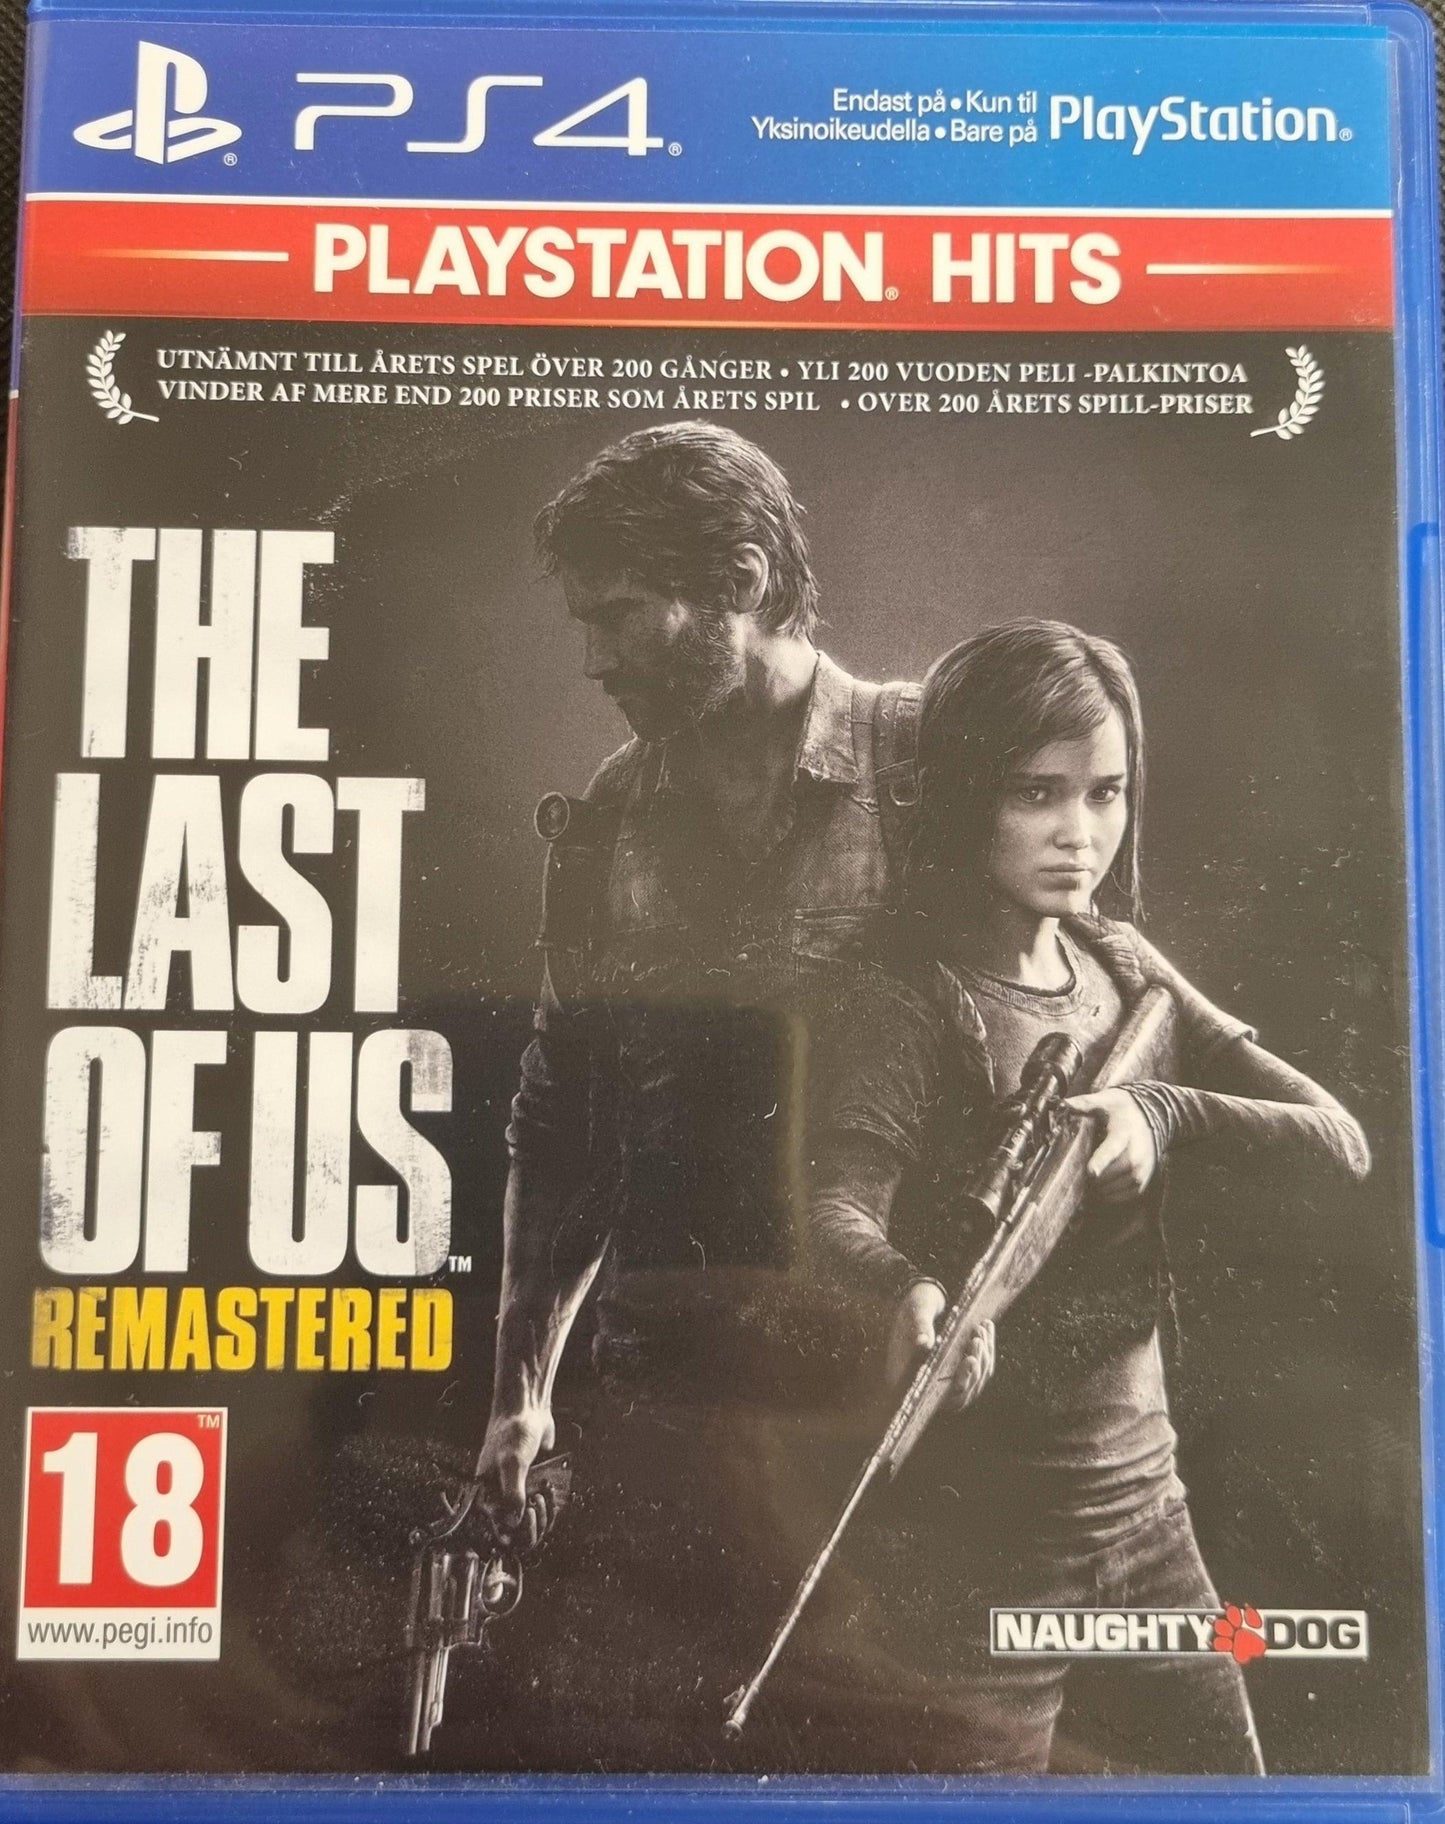 The Last of Us Remastered (Playstation hits) - ZZGames.dk